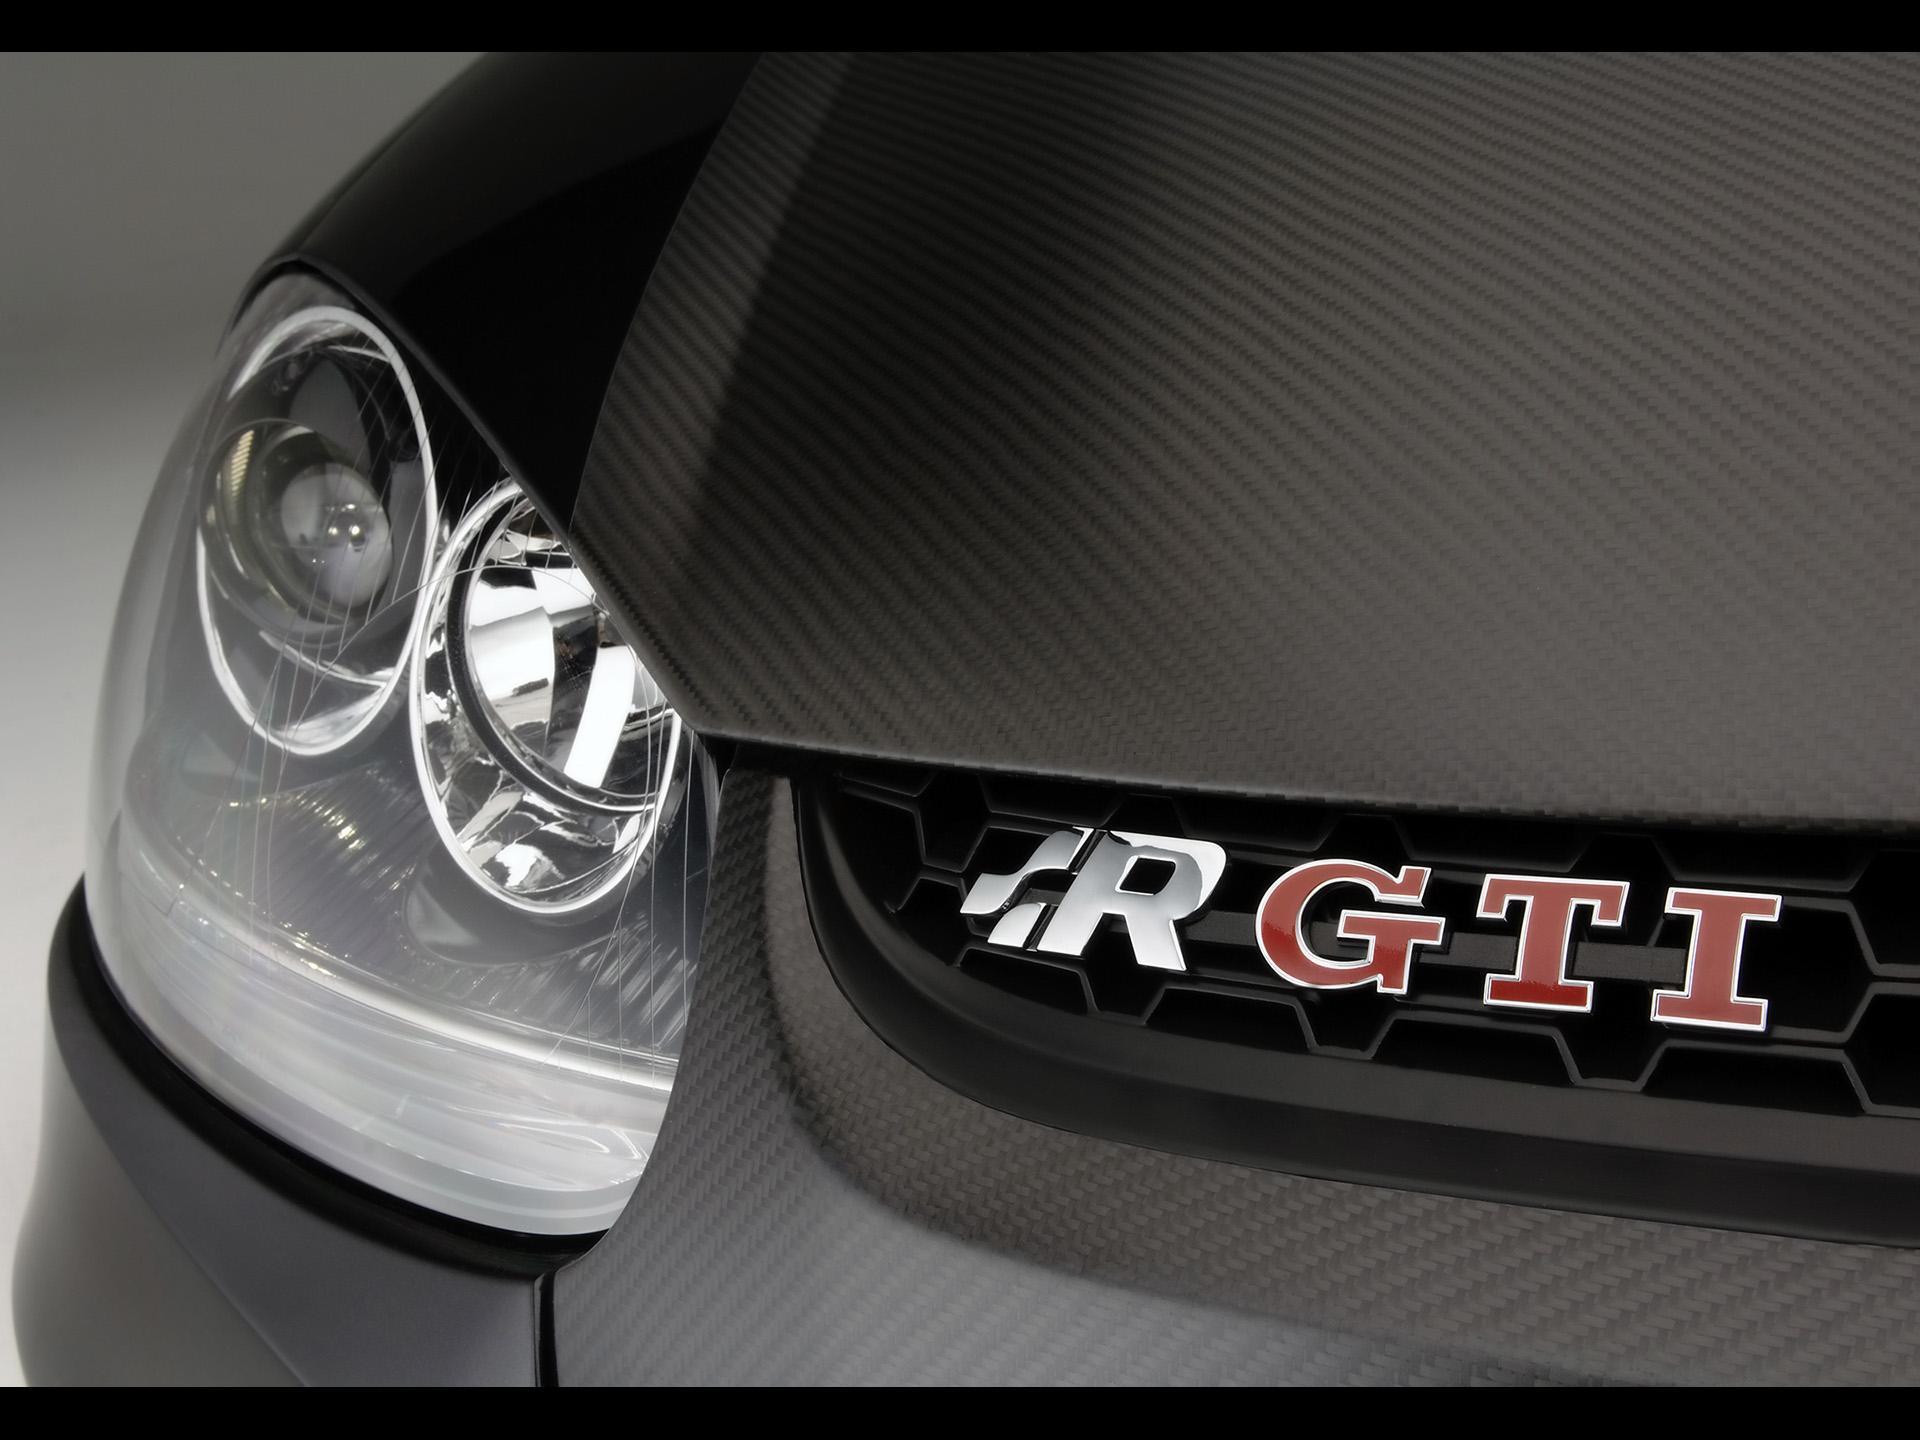 Awesome Volkswagen Golf R GTI wallpaper